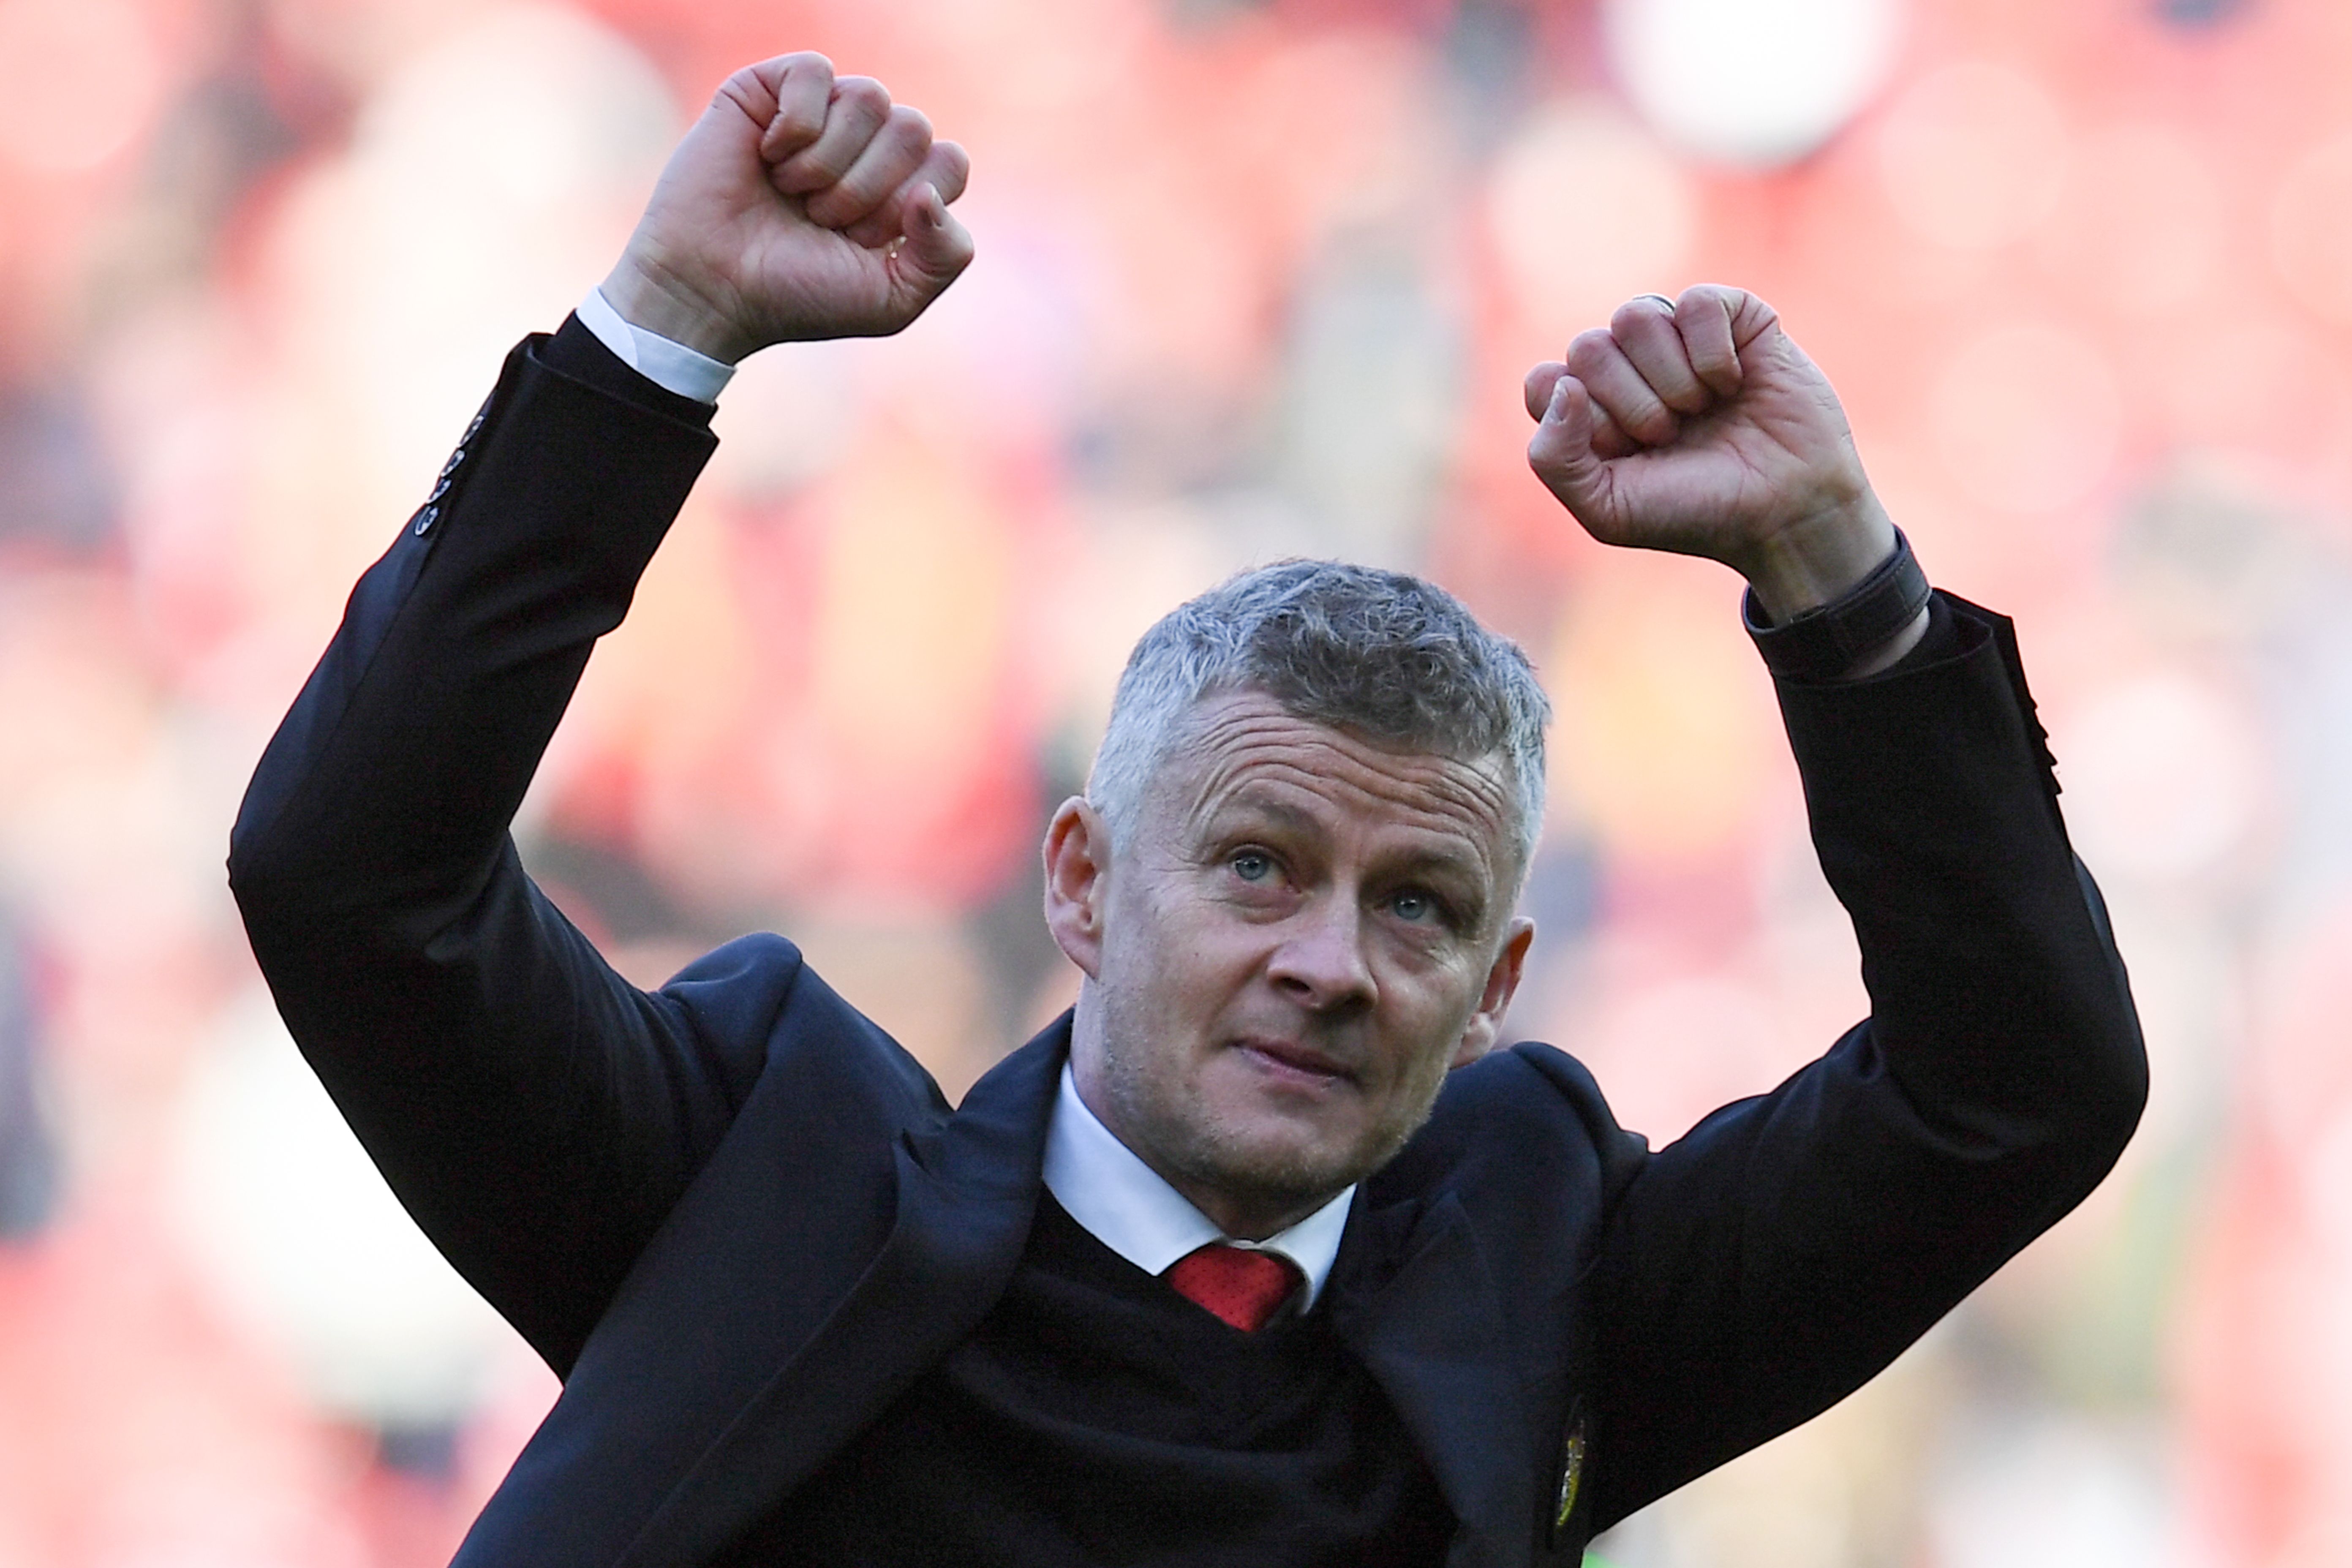 Manchester United's Norwegian manager Ole Gunnar Solskjaer applauds the fans after the final whistle of the English Premier League football match between Manchester United and Watford at Old Trafford in Manchester, north west England, on March 30, 2019. (Photo by Paul ELLIS / AFP) / RESTRICTED TO EDITORIAL USE. No use with unauthorized audio, video, data, fixture lists, club/league logos or 'live' services. Online in-match use limited to 120 images. An additional 40 images may be used in extra time. No video emulation. Social media in-match use limited to 120 images. An additional 40 images may be used in extra time. No use in betting publications, games or single club/league/player publications. /         (Photo credit should read PAUL ELLIS/AFP/Getty Images)